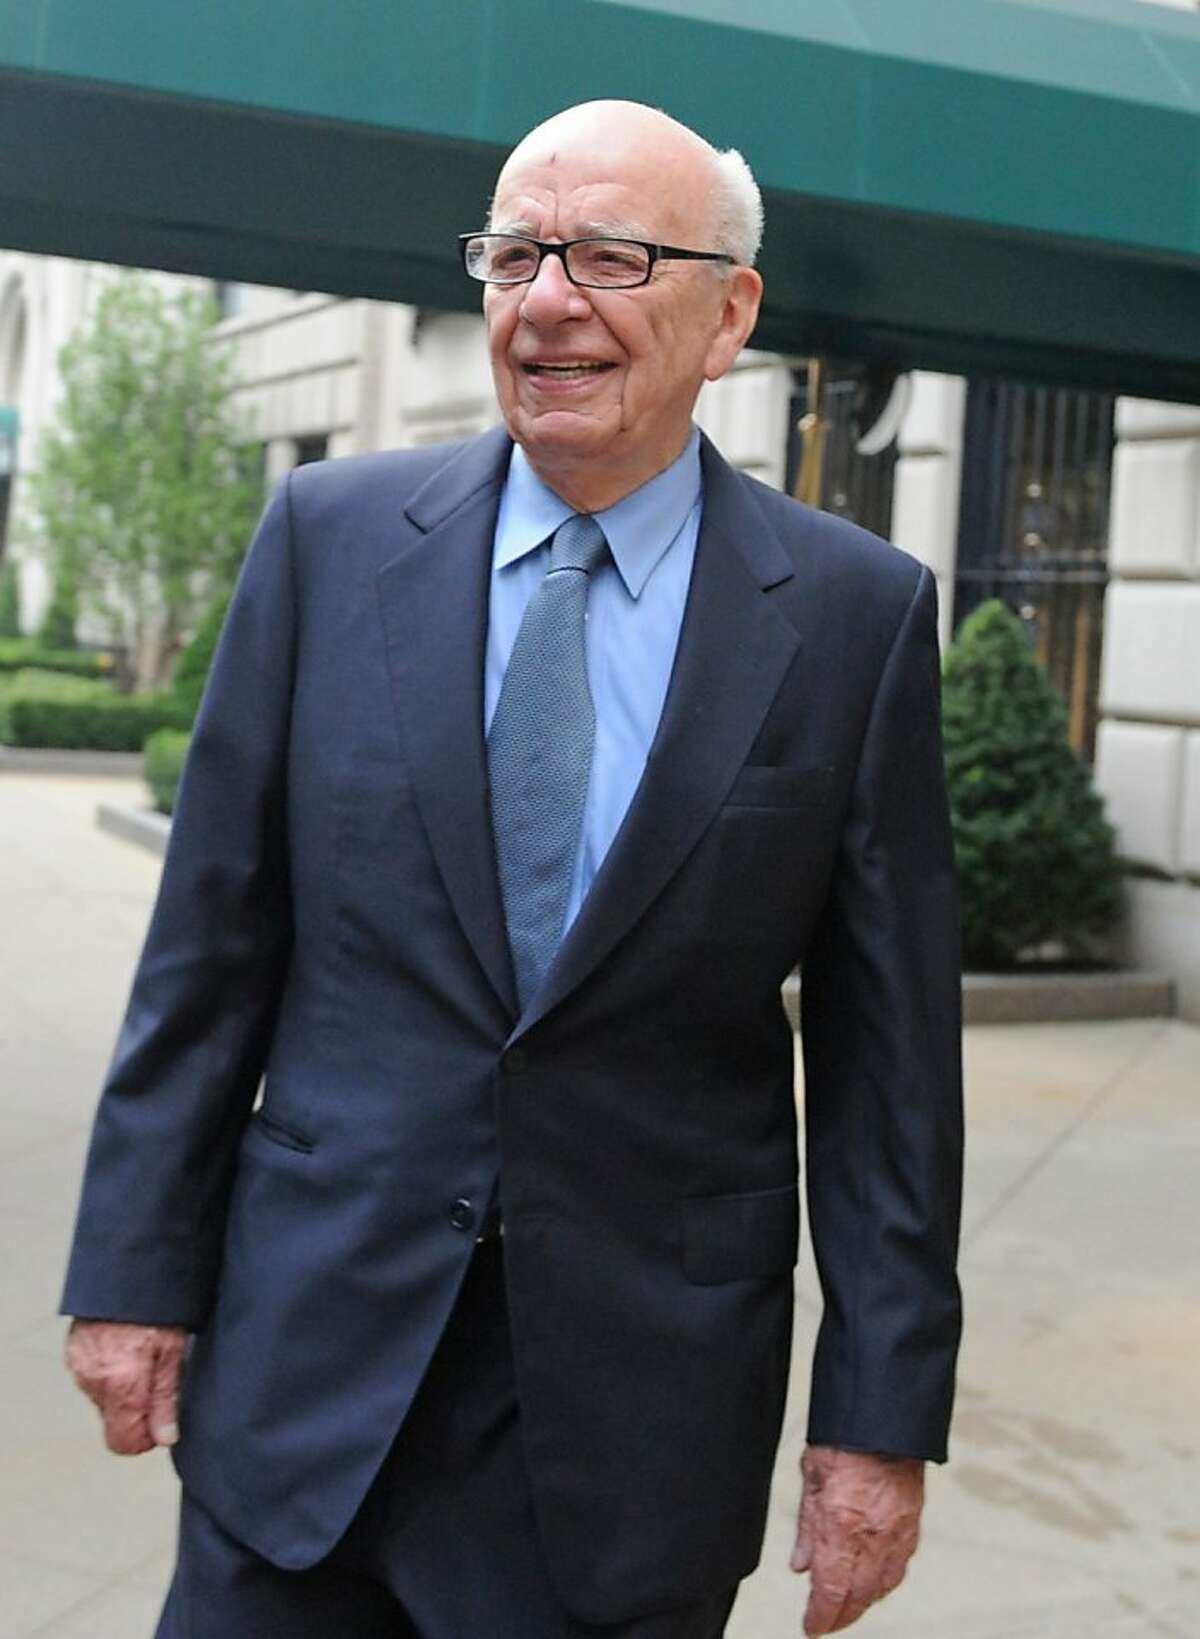 News Corporation head Rupert Murdoch exits his Fifth Avenue residence, Thursday, July 21, 2011, in New York. As the scandal runs its course in the U.K., Murdoch's News Corp. must confront at least two U.S.-based shareholder lawsuits, a possible Standard & Poor's credit downgrade, and the beginnings of a federal investigation. (AP Photo/Louis Lanzano) Ran on: 08-11-2011 Rupert Murdochs News Corp. lost income after the sale of social-networking site Myspace.